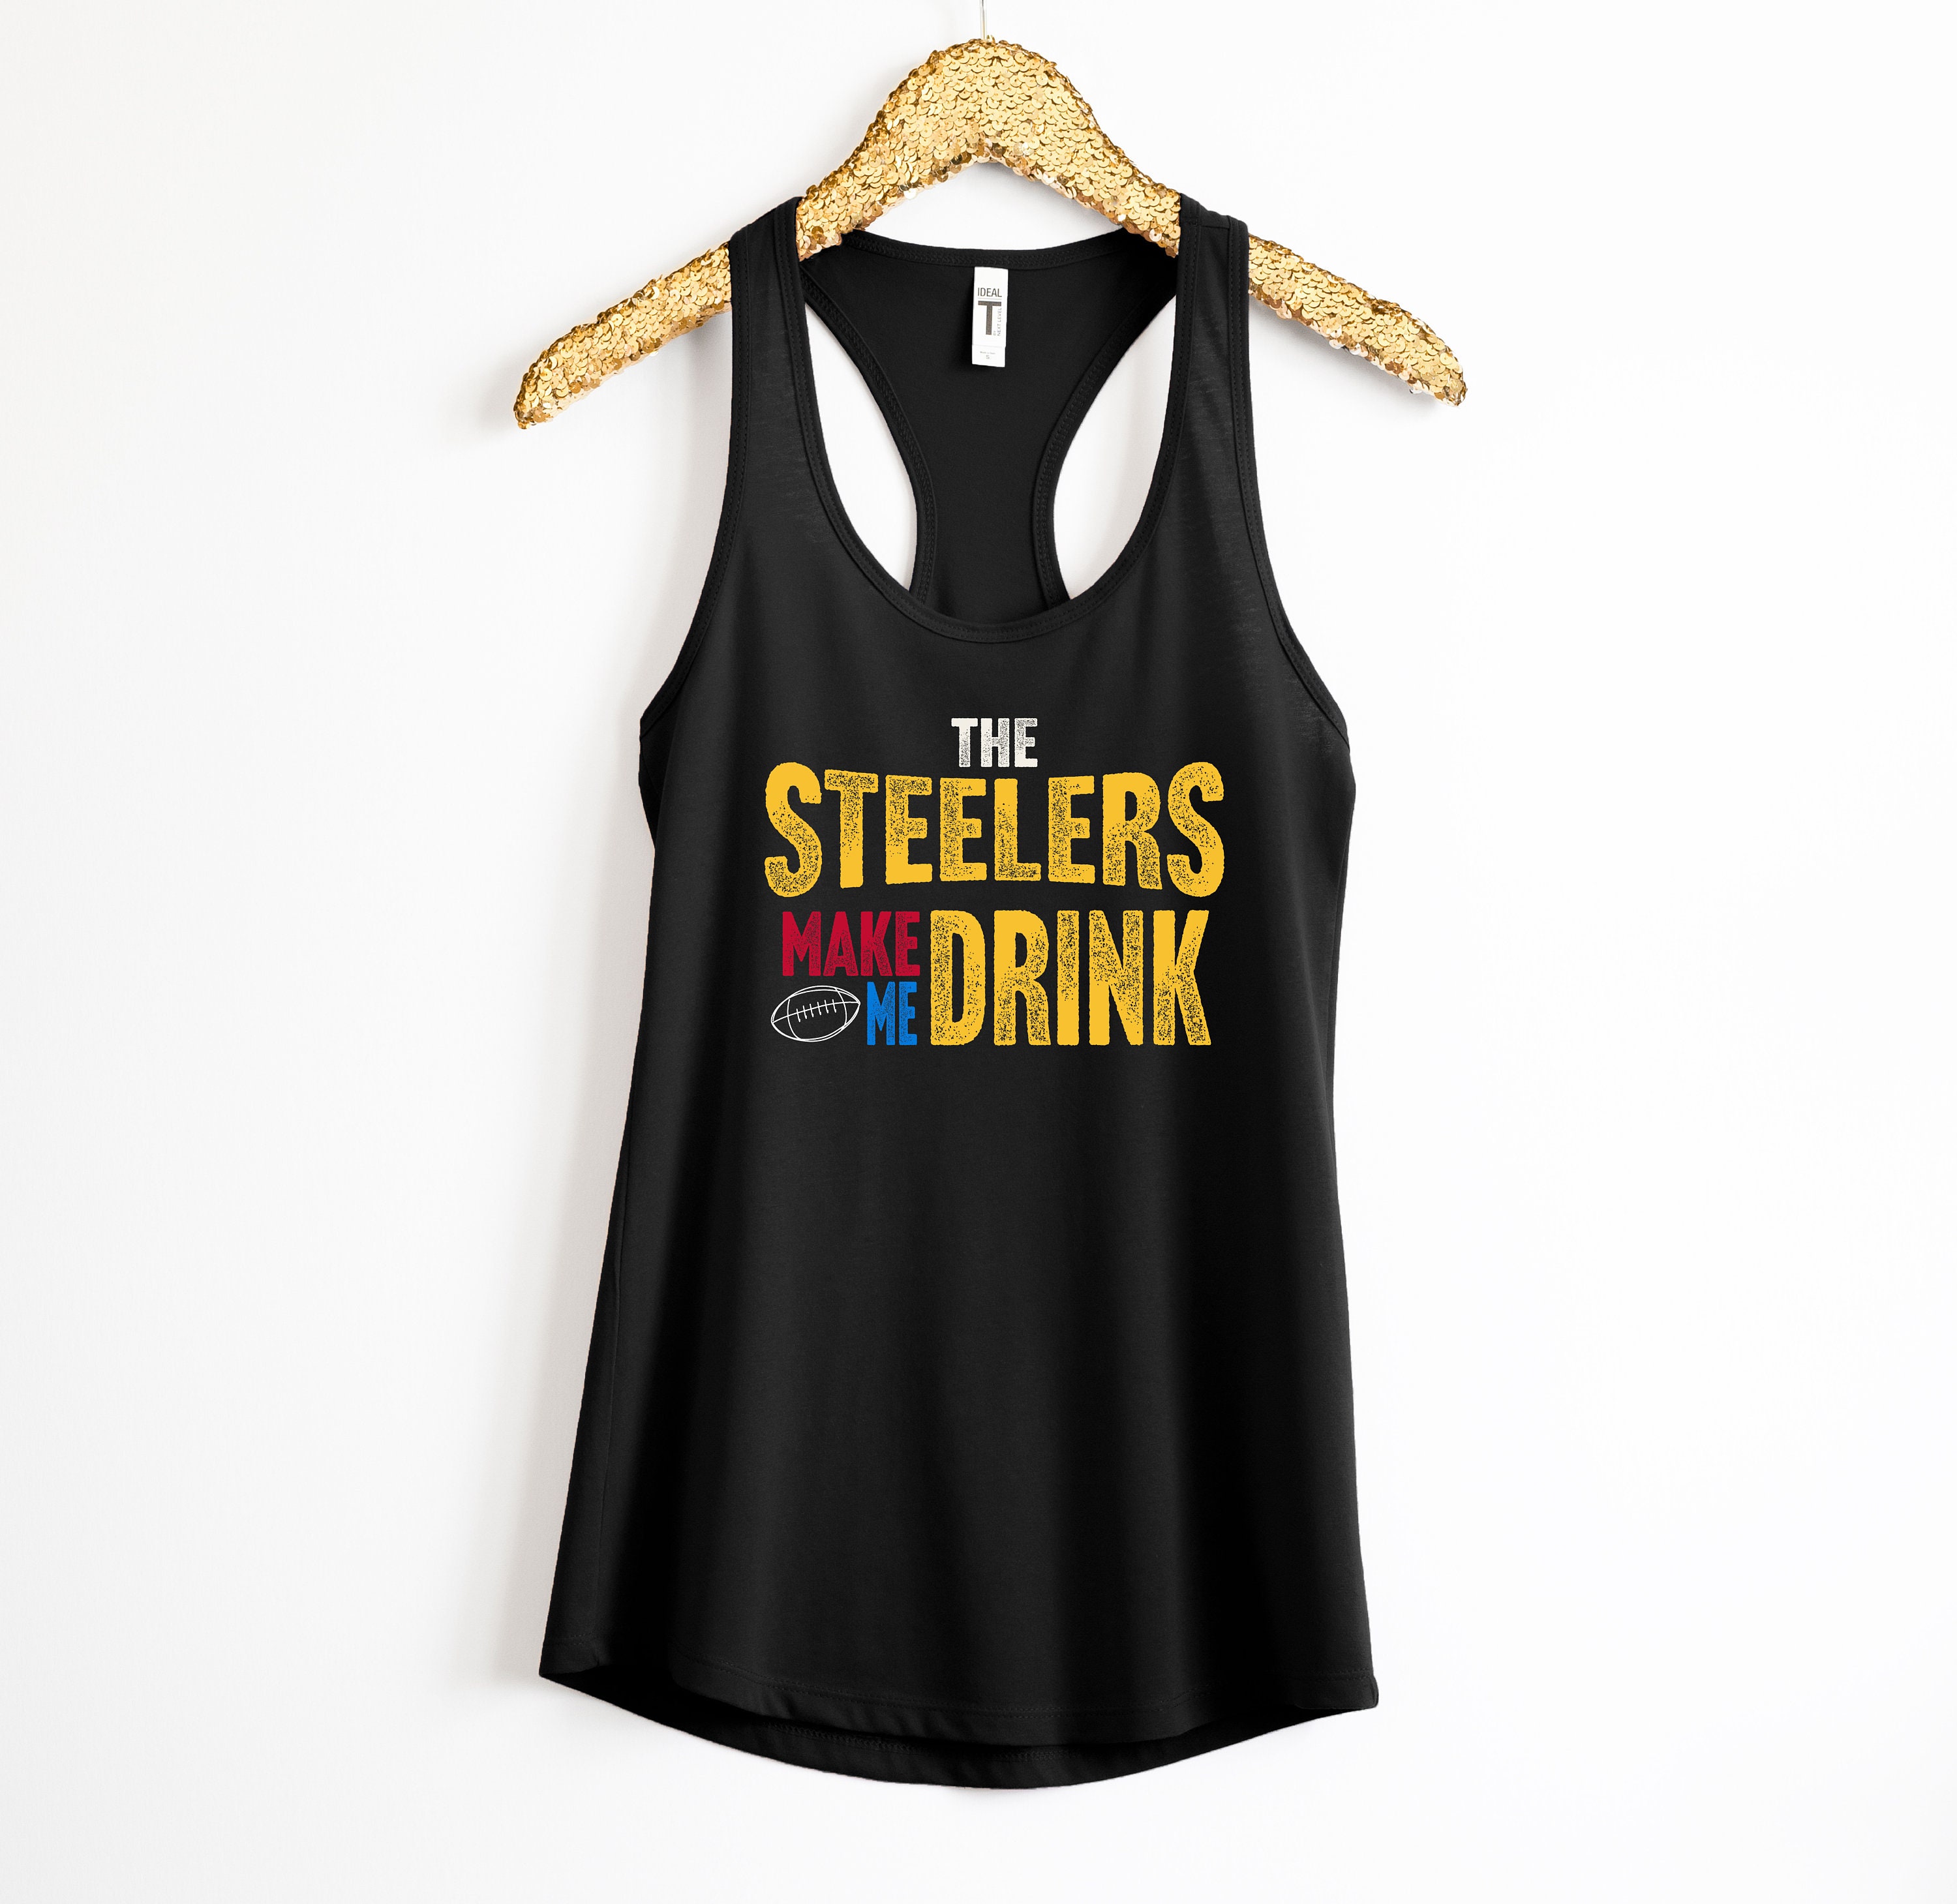 Pittsburgh Steelers Womens Black Playoff Tank Top